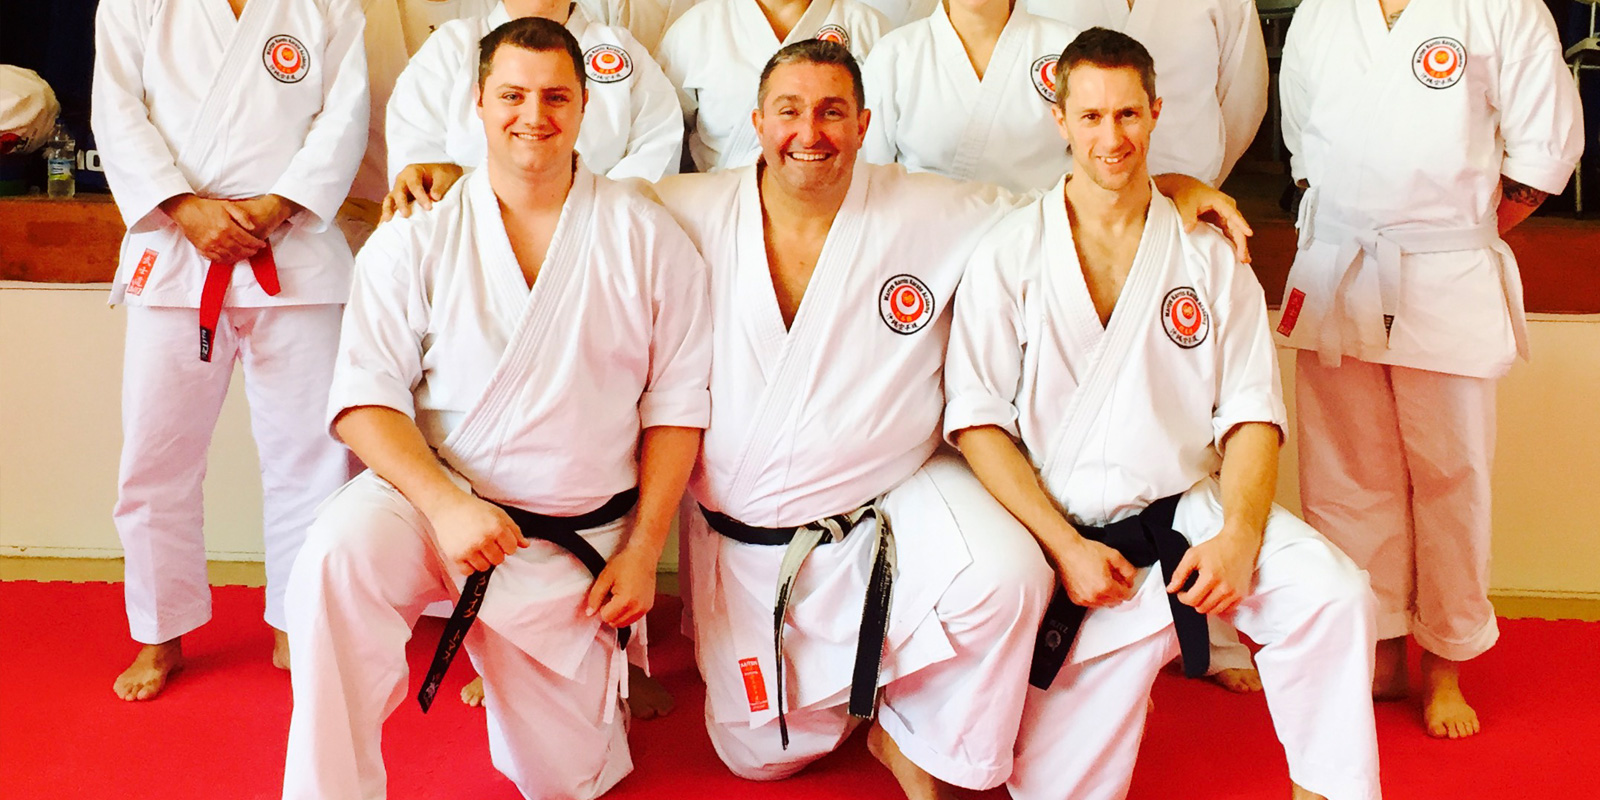 About Martyn Harris and Karate in Cardiff